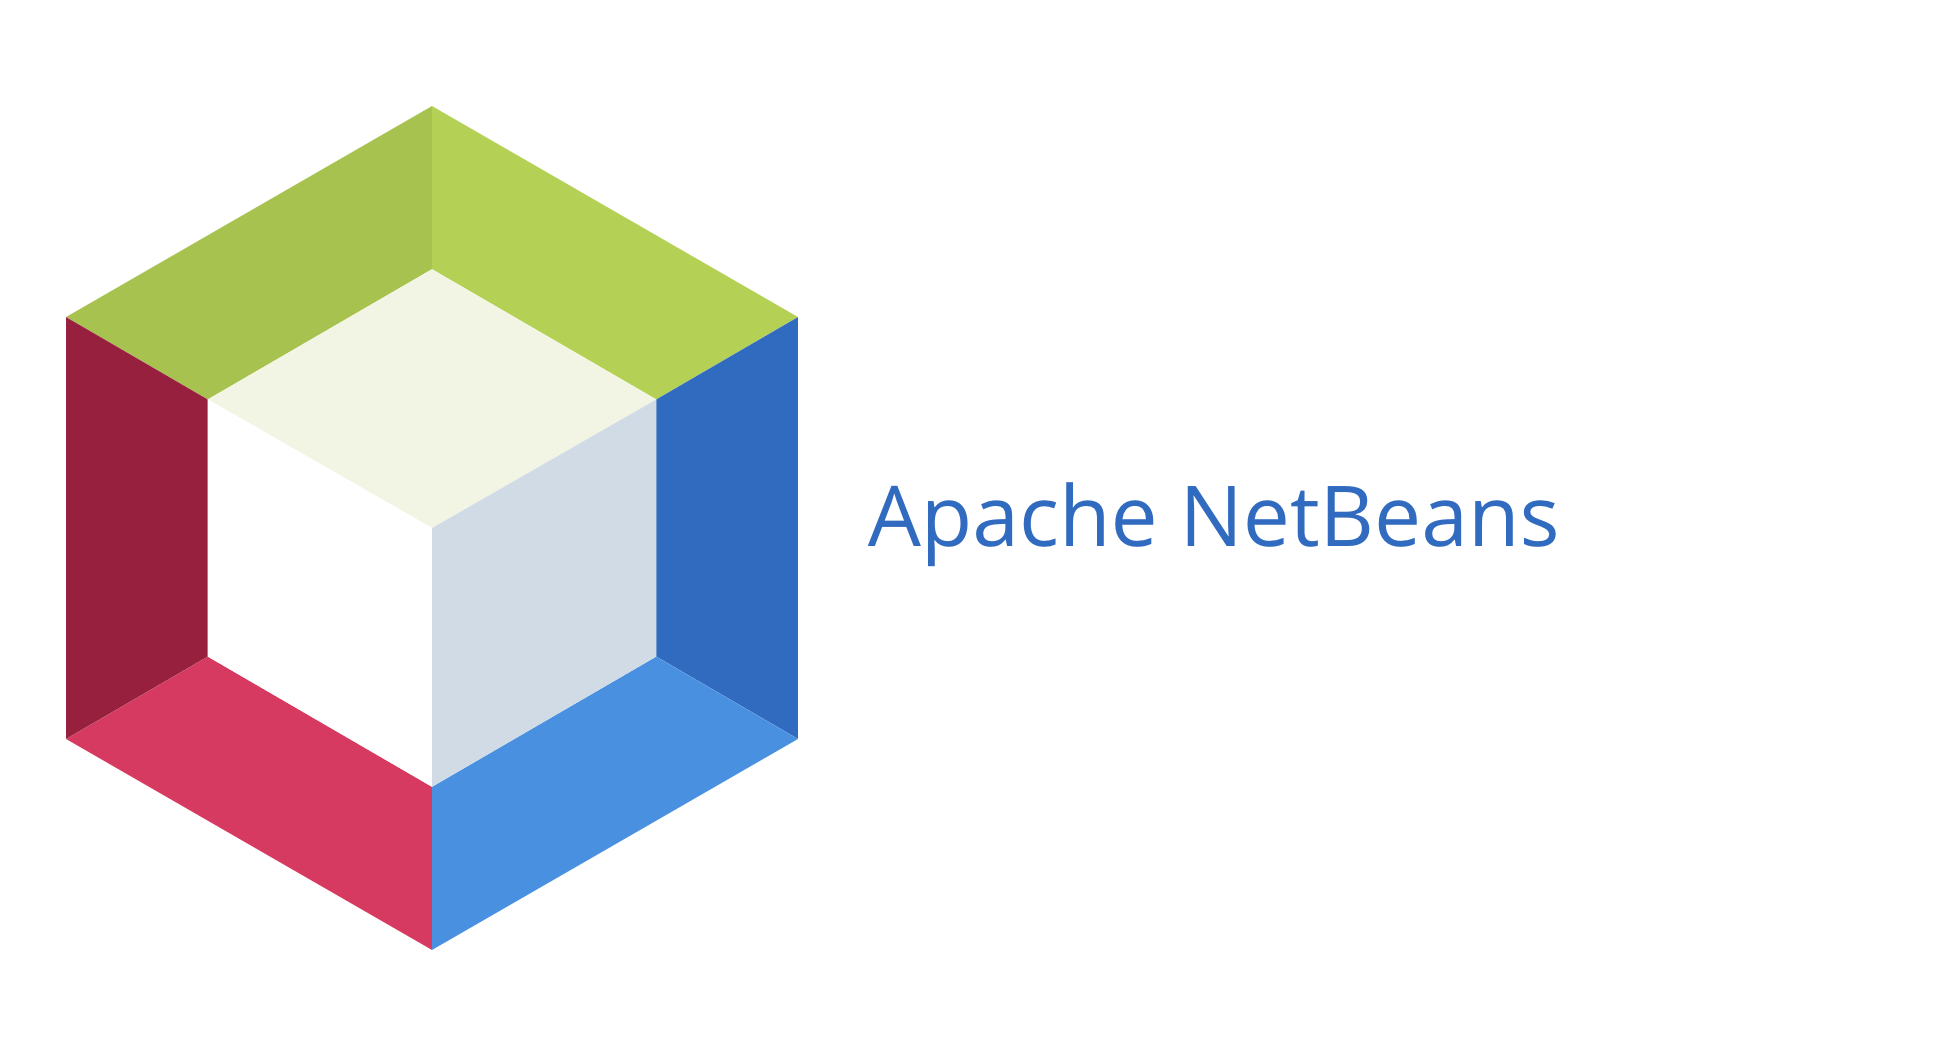 Apache NetBeans is Now a Top-Level Project of the Apache Software Foundation